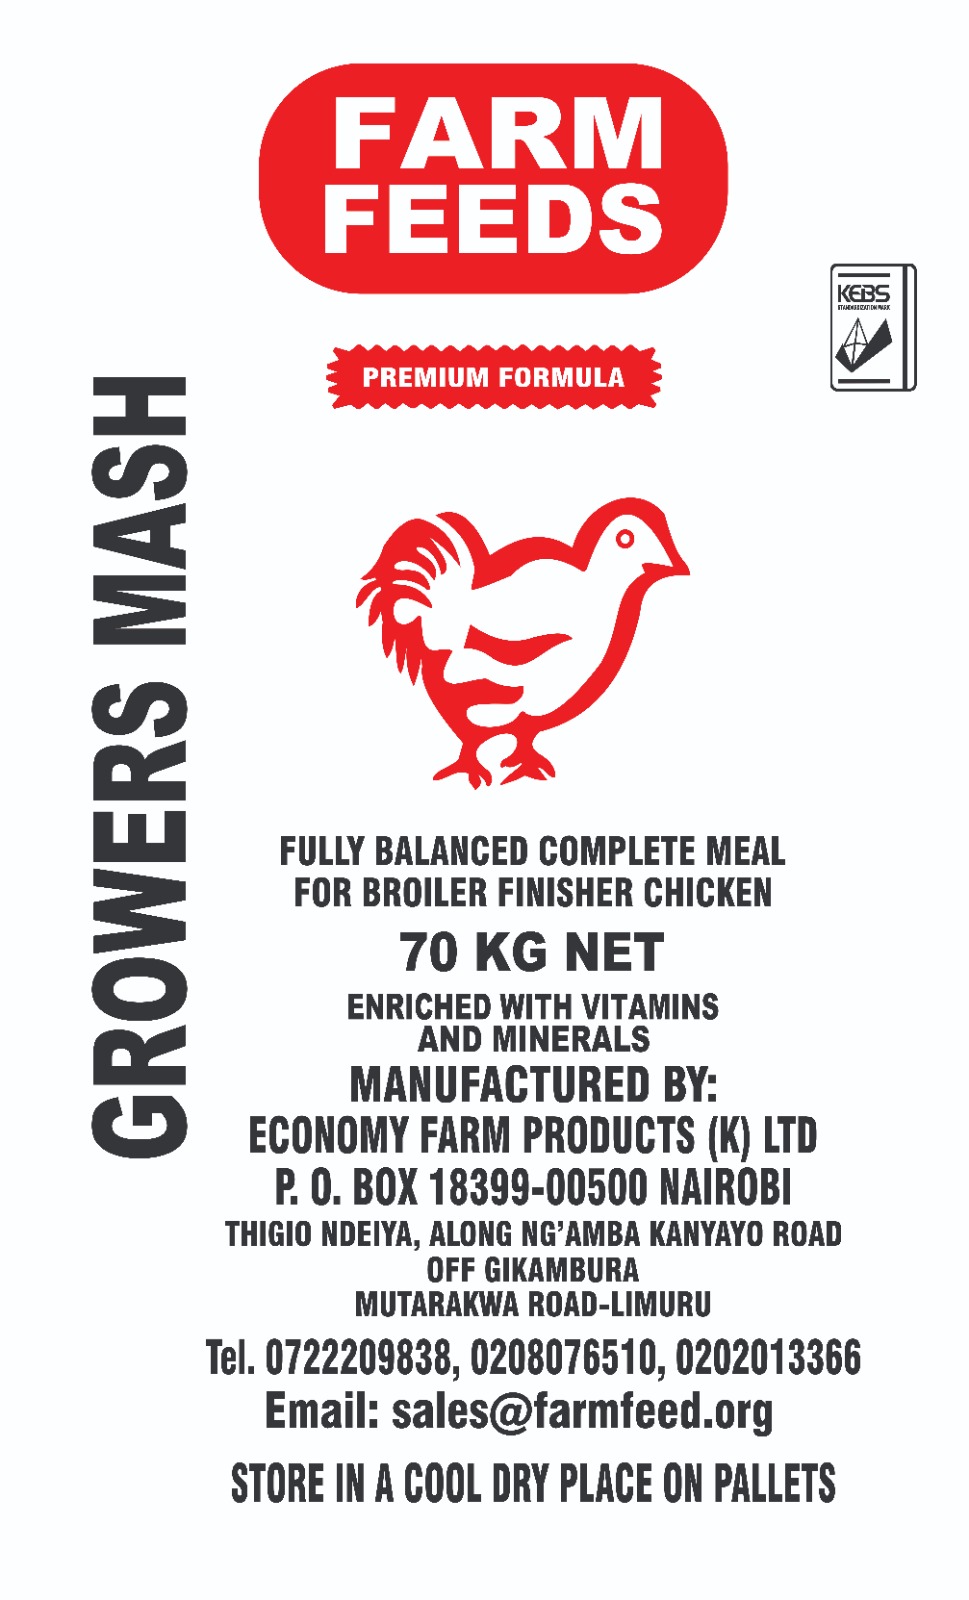 Well balanced for energy, proteins, vitamins, and minerals to ensure pullets attain a minimum of 1.5 kgs live weight at the point of lay, so as to quickly reach peak production and maintain high production for a long time.
Also contains Coccidistat for the prevention of coccidiosis in the growing pullets.